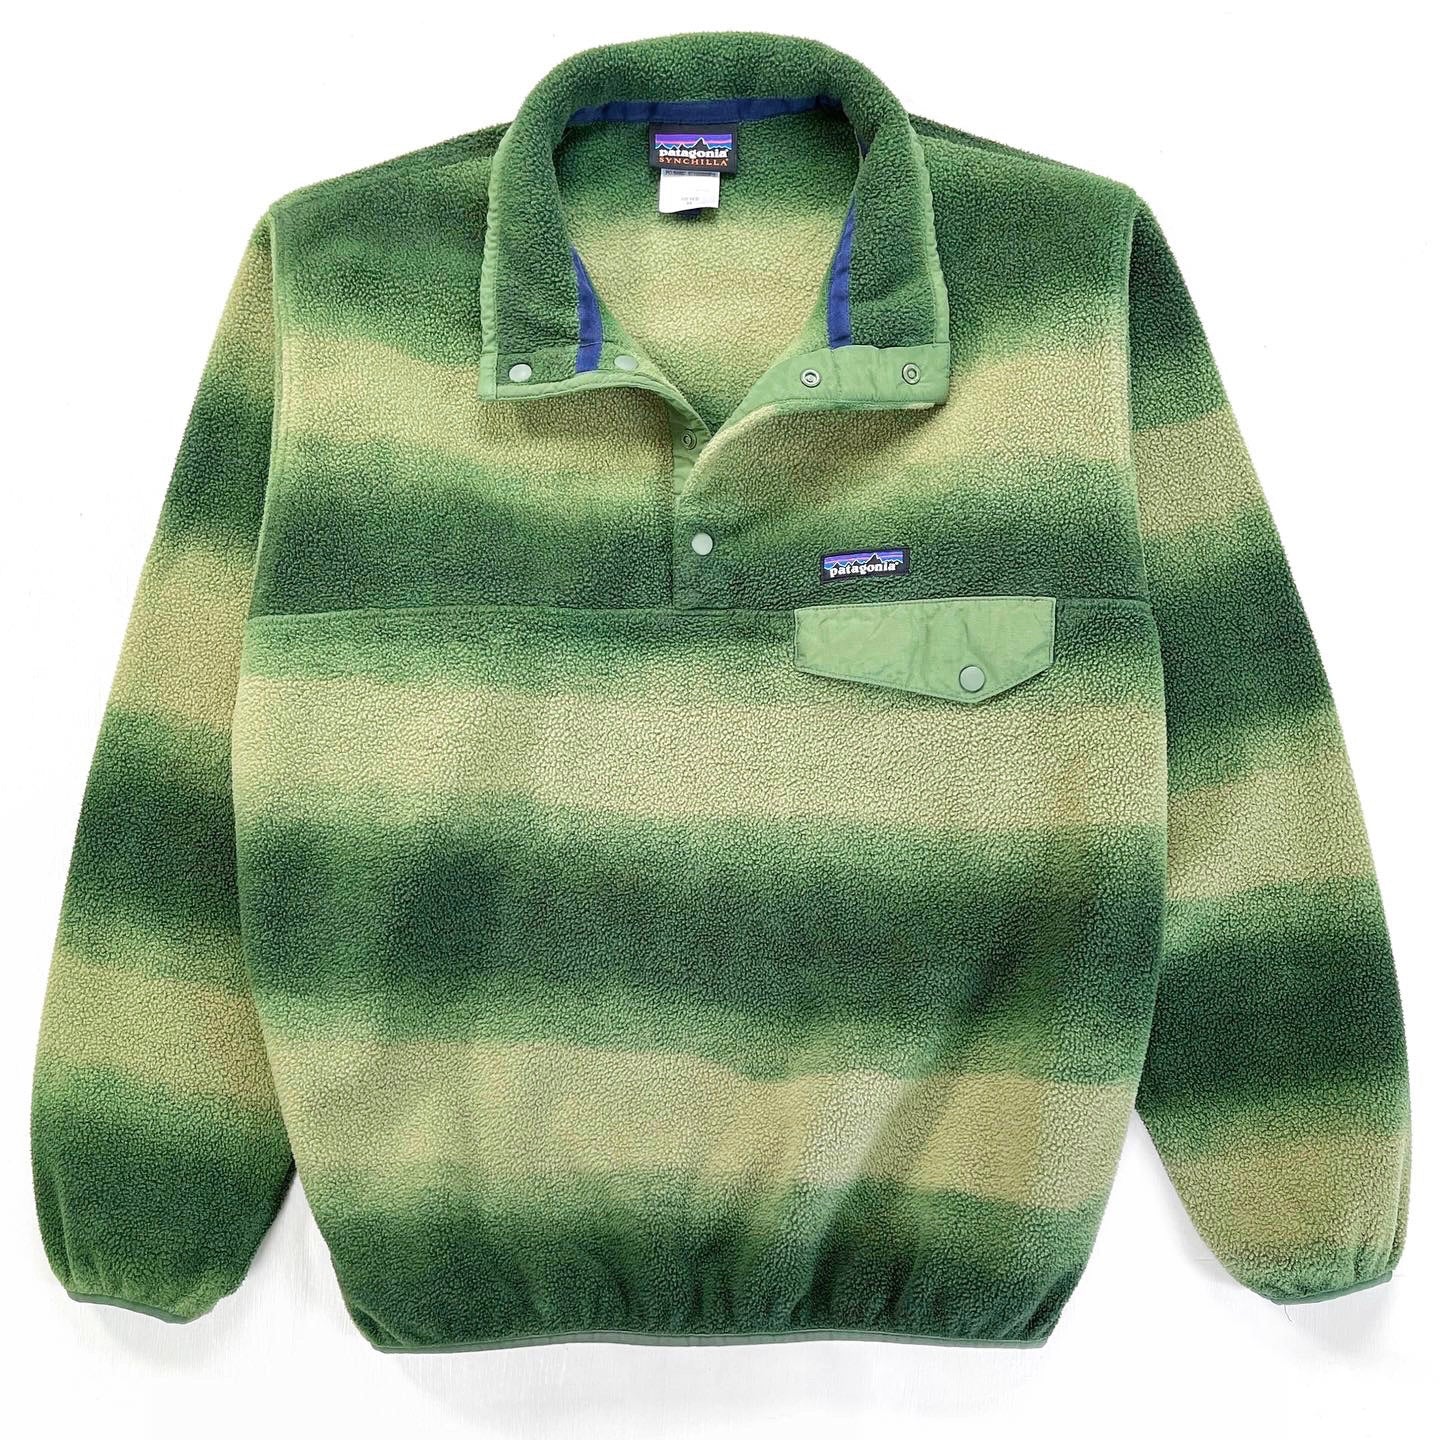 2015 Patagonia Printed Synchilla Snap-T, Hand Dipped: Green (M)